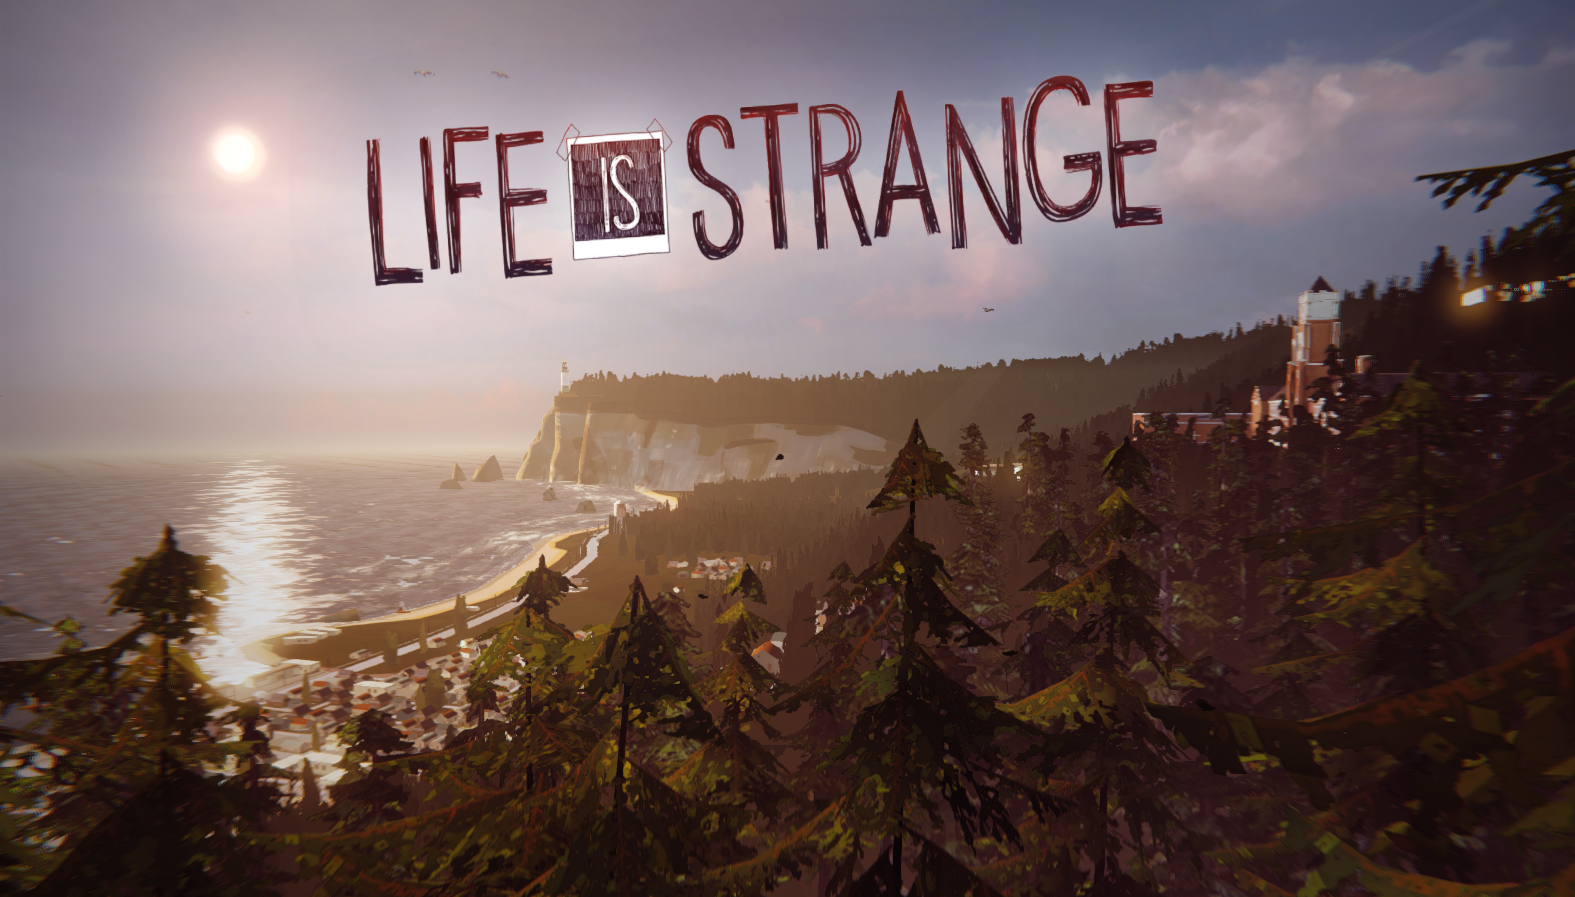 Amazing Life Is Strange Wallpaper Full HD Pictures